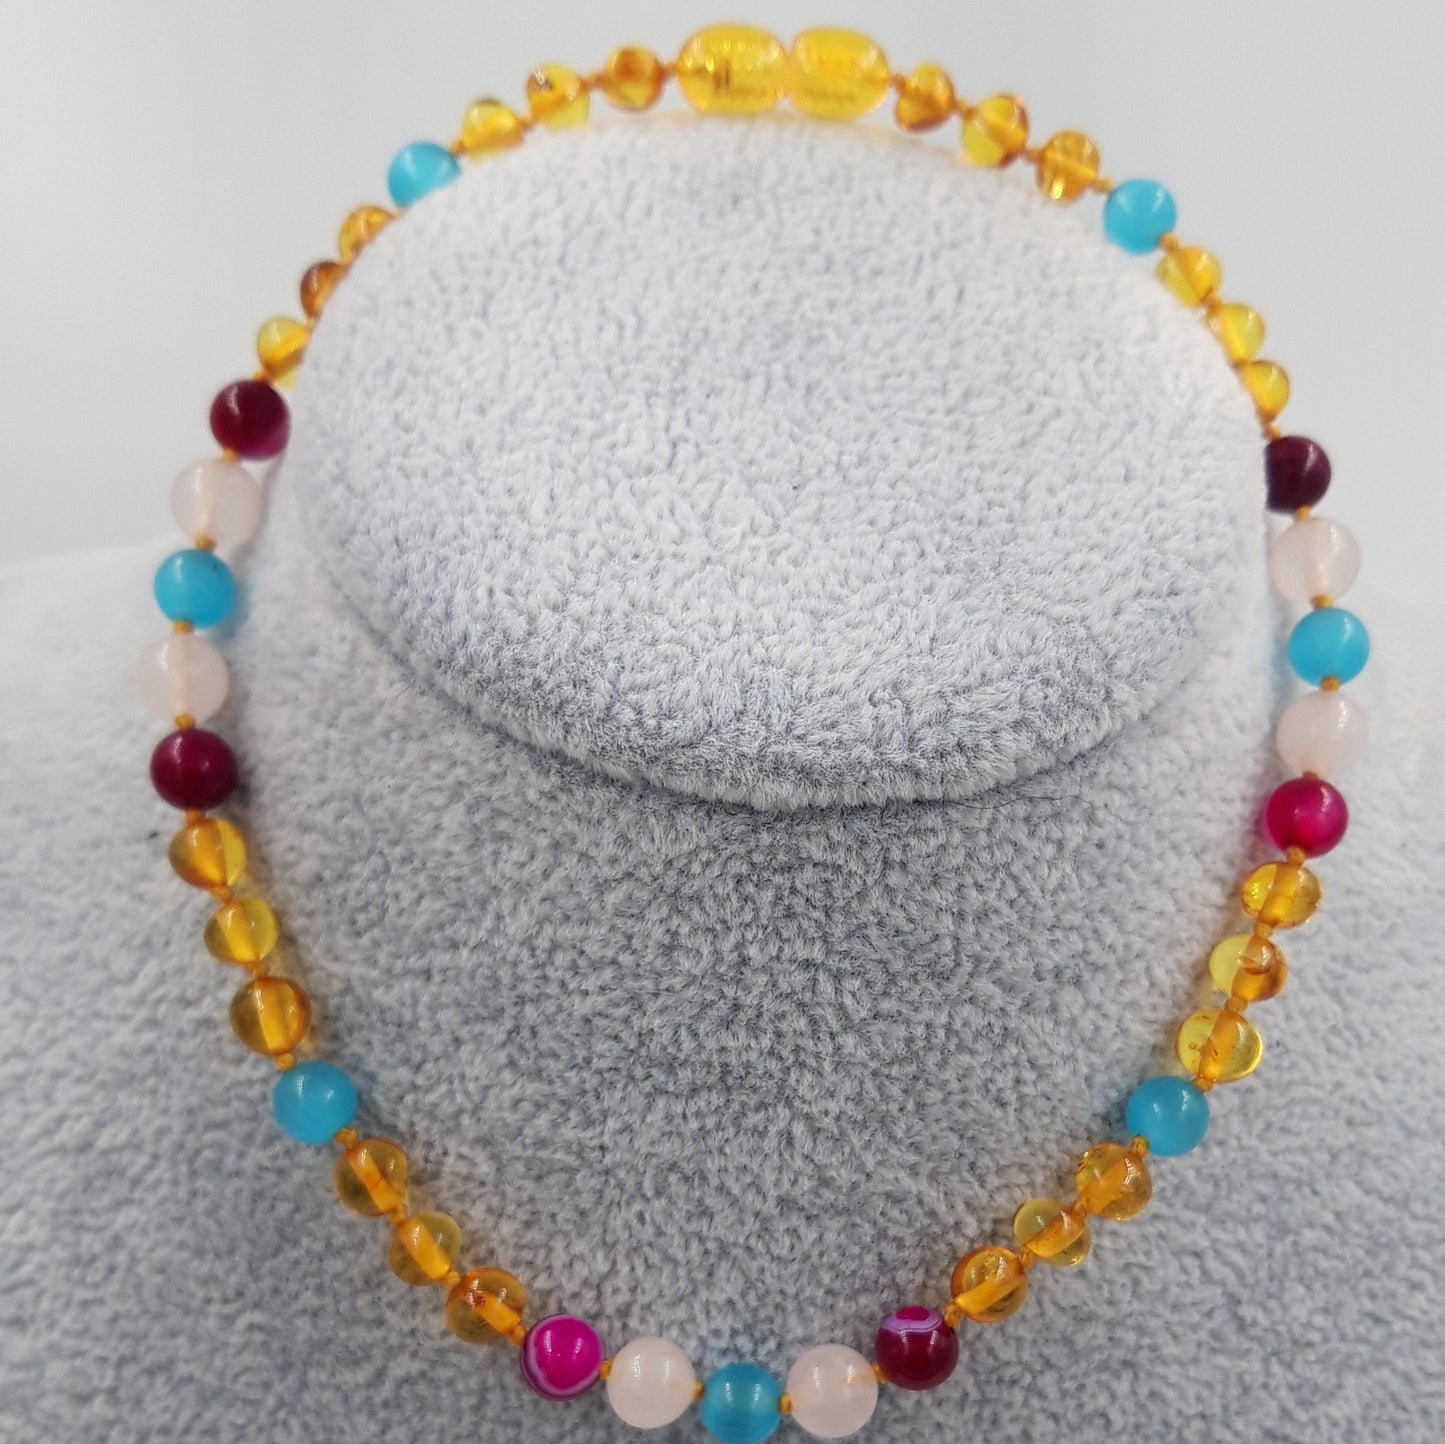 Baltic amber necklace for children